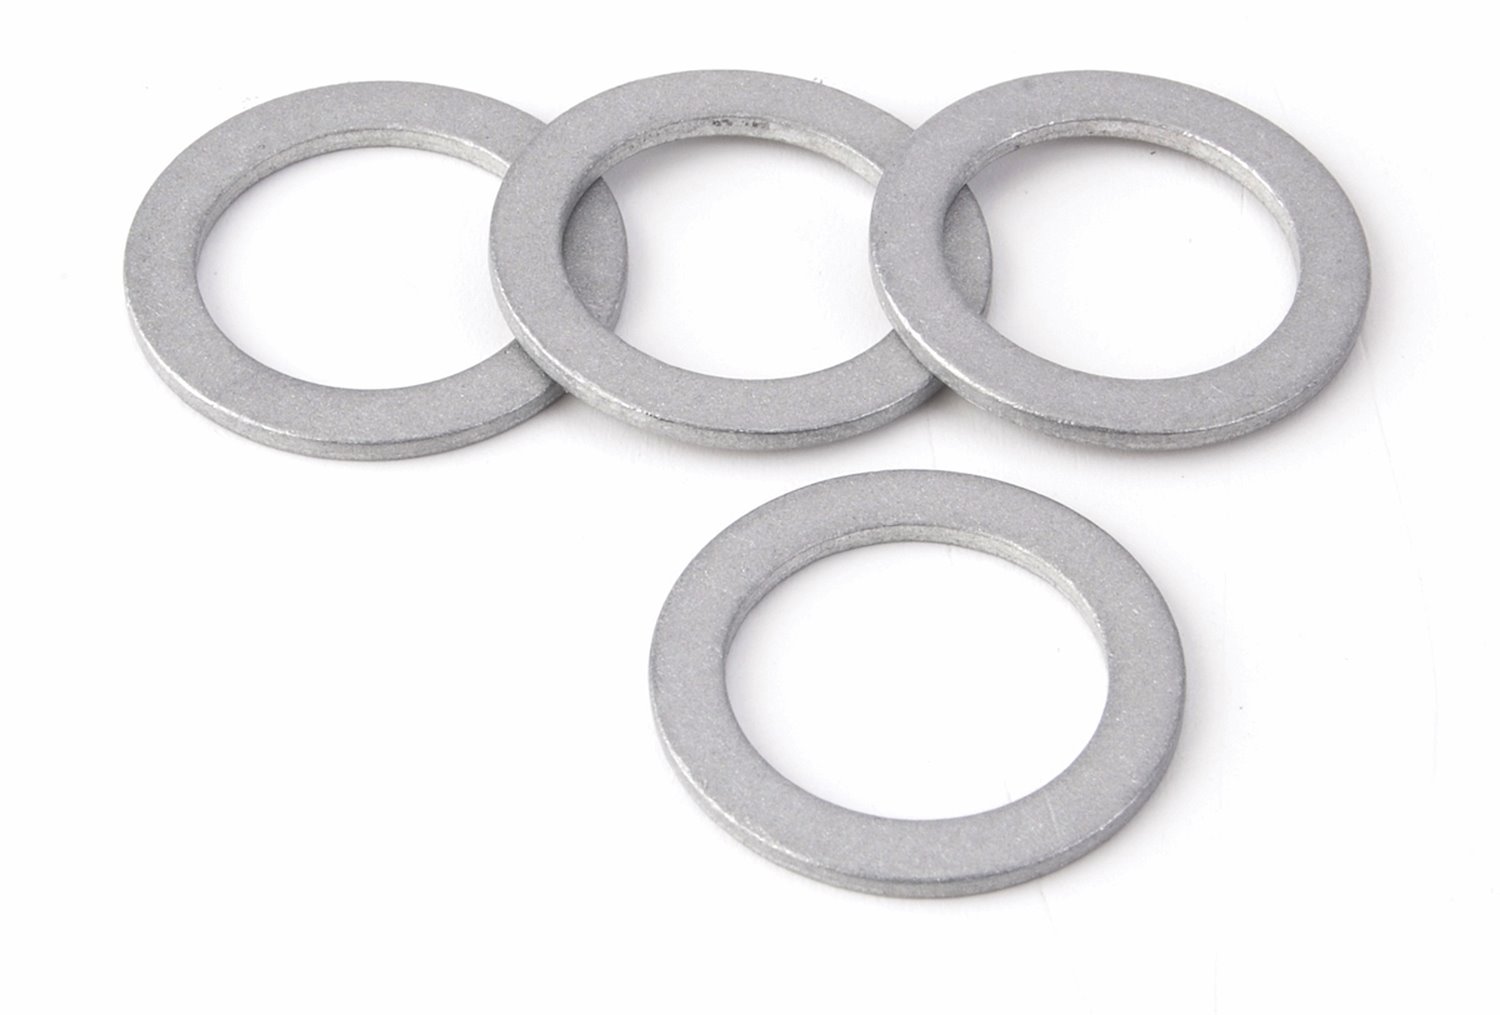 Carburetor Inlet Fitting Washers 9/16"-24 Fits Holley Single Feed & all Demon Carbs